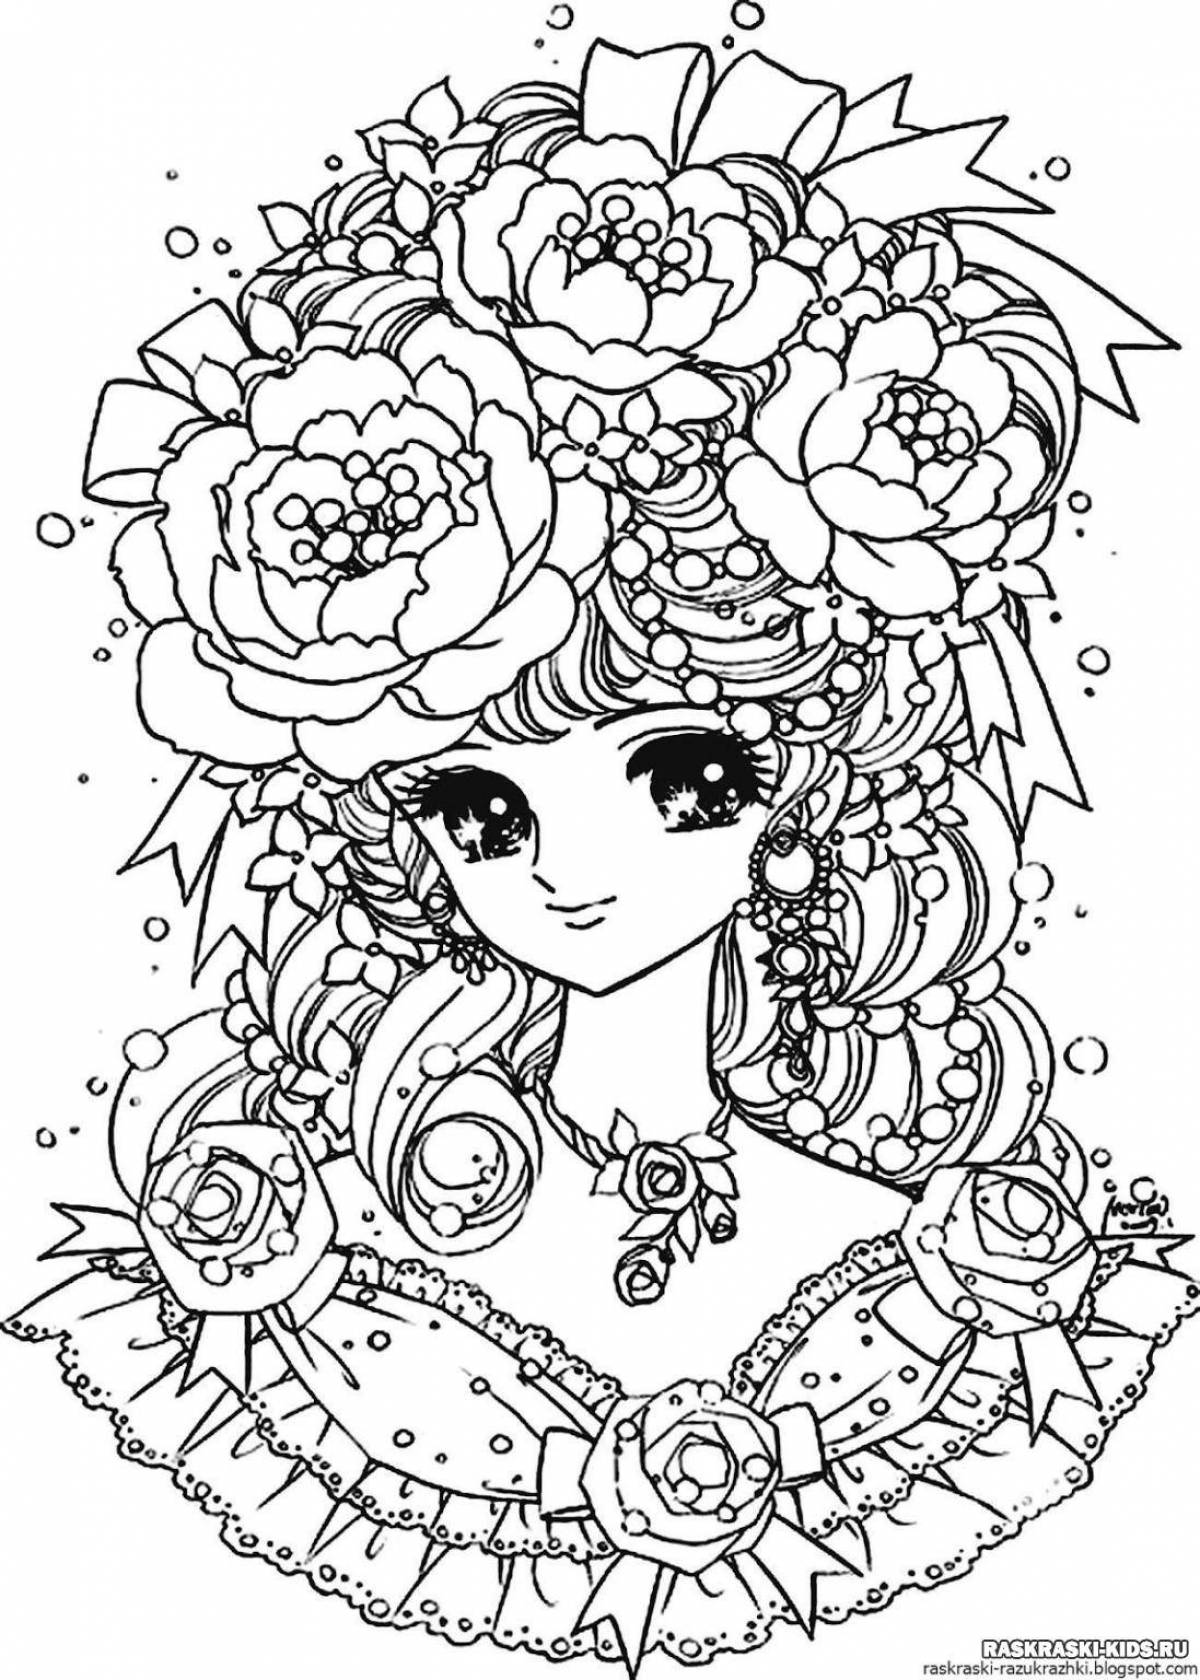 Luxury coloring book for girls 10 years old